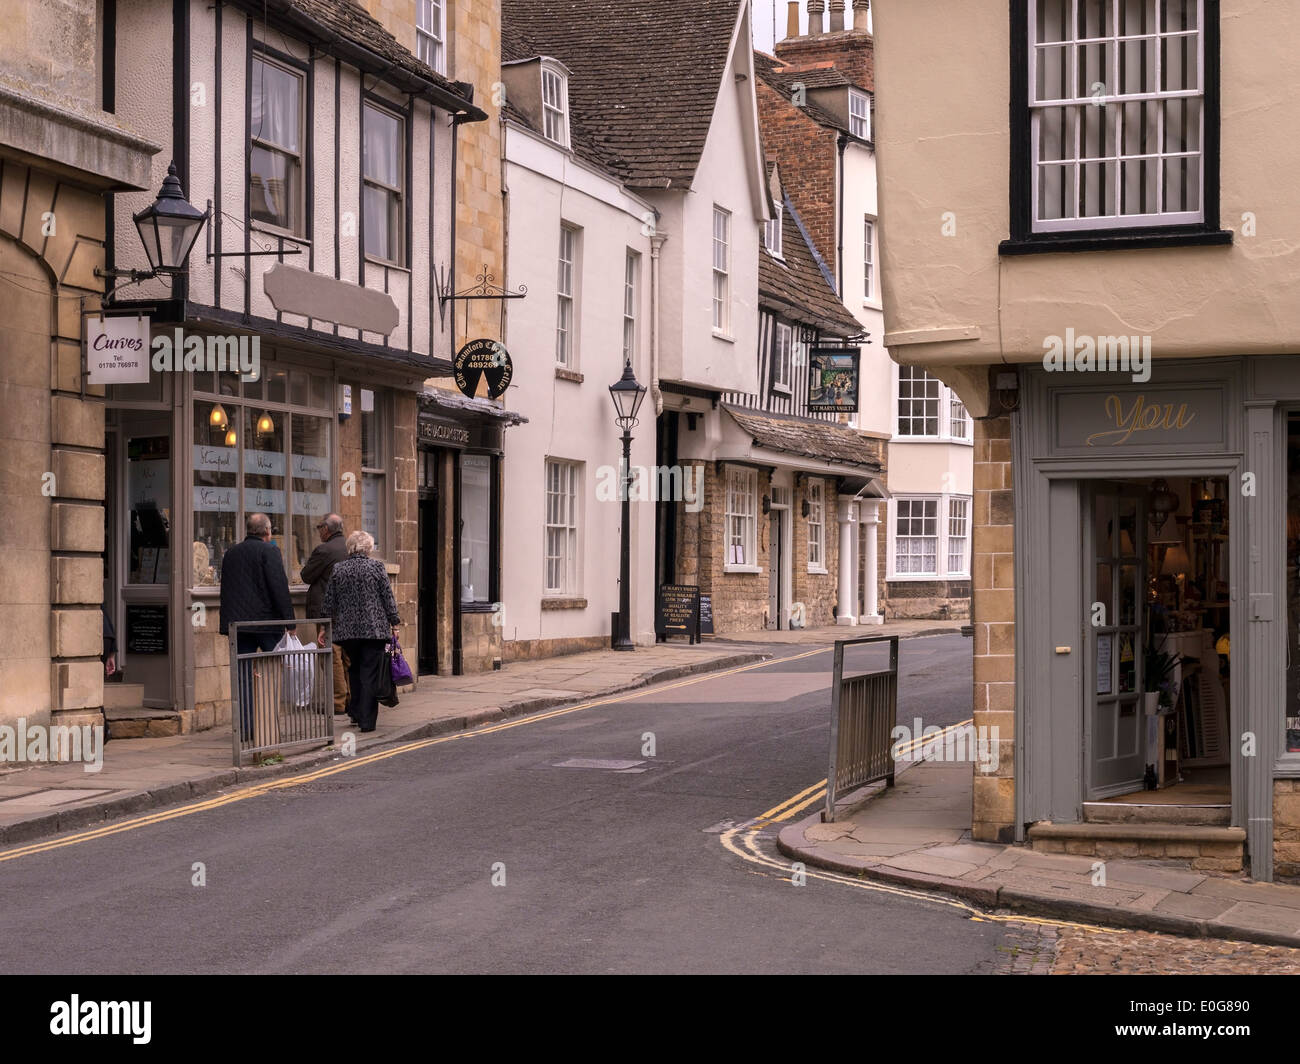 Attractive traditional old shop fronts and stone buildings, Stamford, Lincolnshire, England, UK Stock Photo